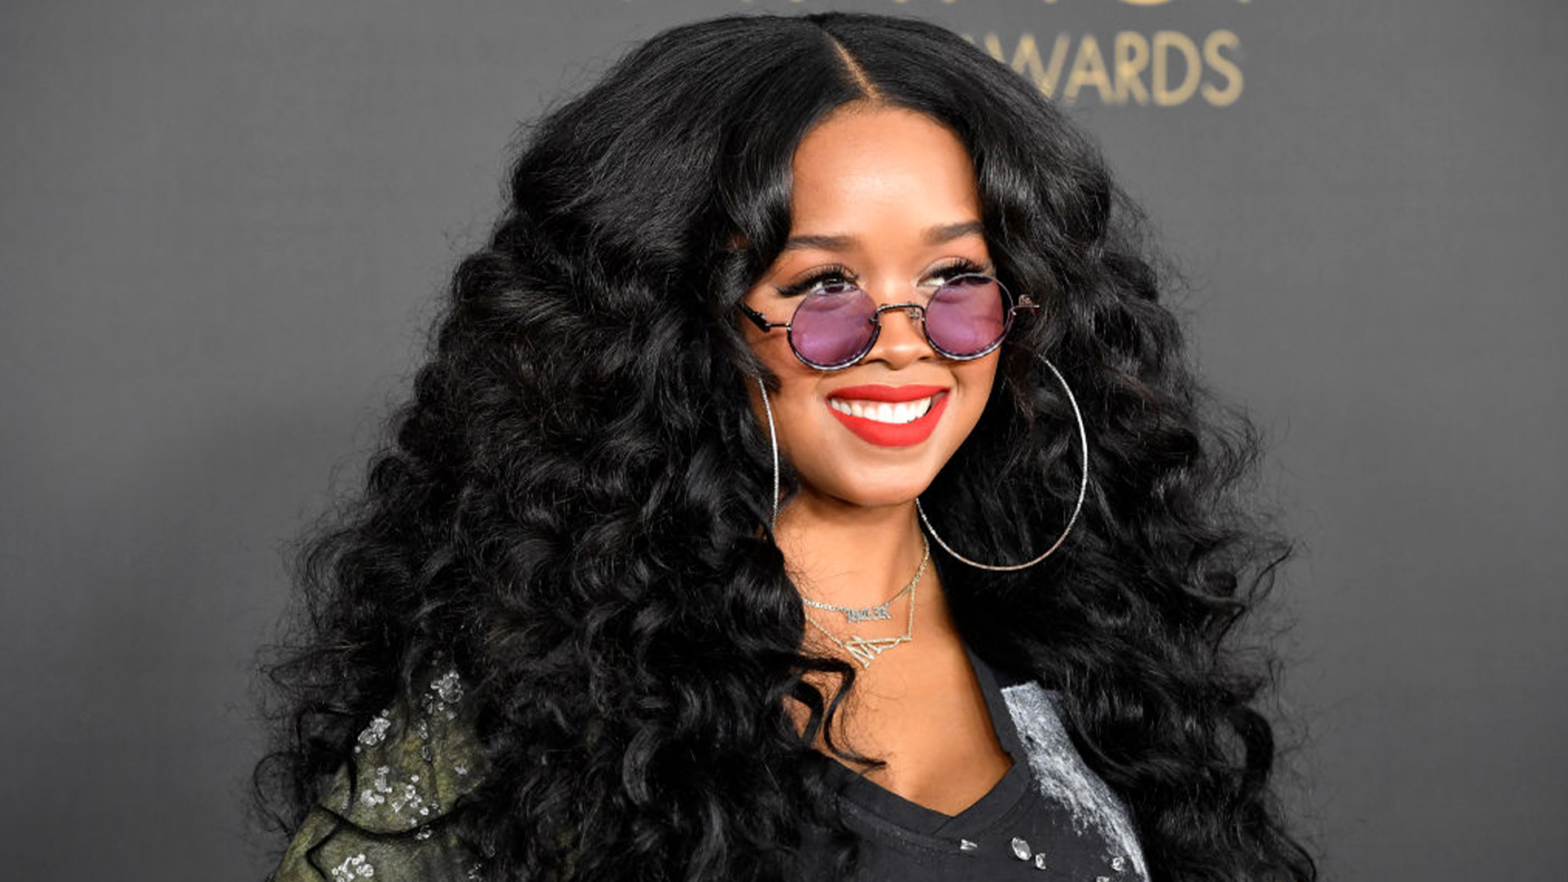 H.E.R. Officially Files Lawsuit To Be Released From Her Label Of 11 Years, Citing A Labor Code Violation As The Reason